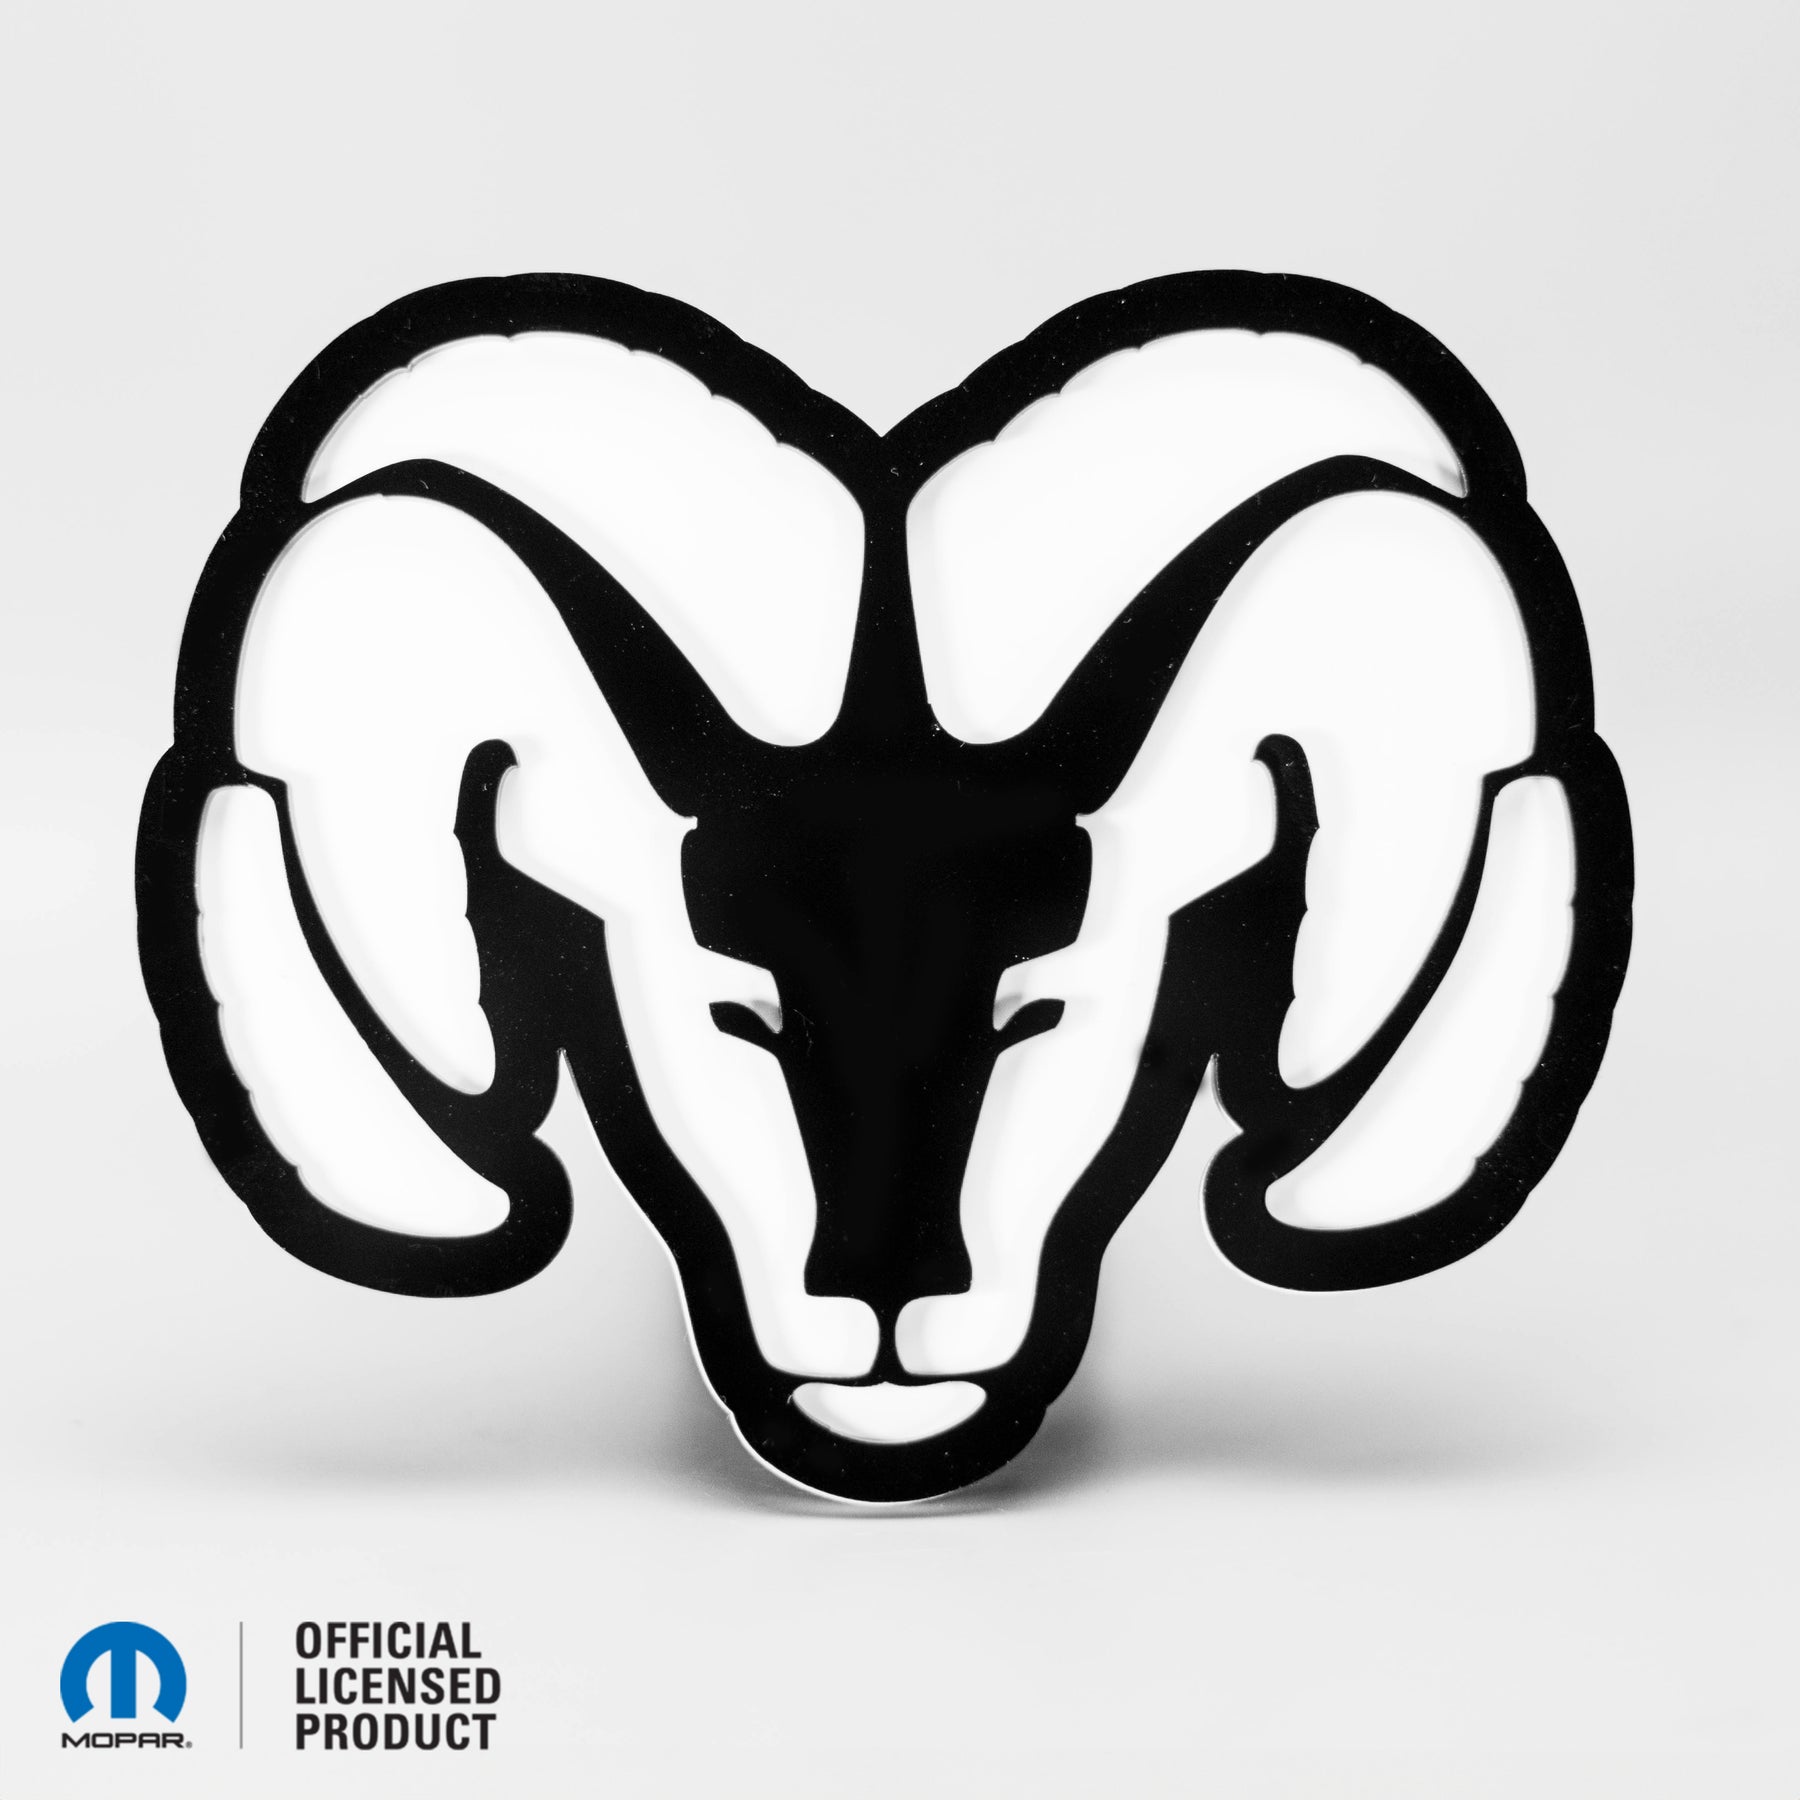 RAM® HEAD LOGO STYLE 2 - HITCH COVER - Gloss on White - Officially Licensed Product